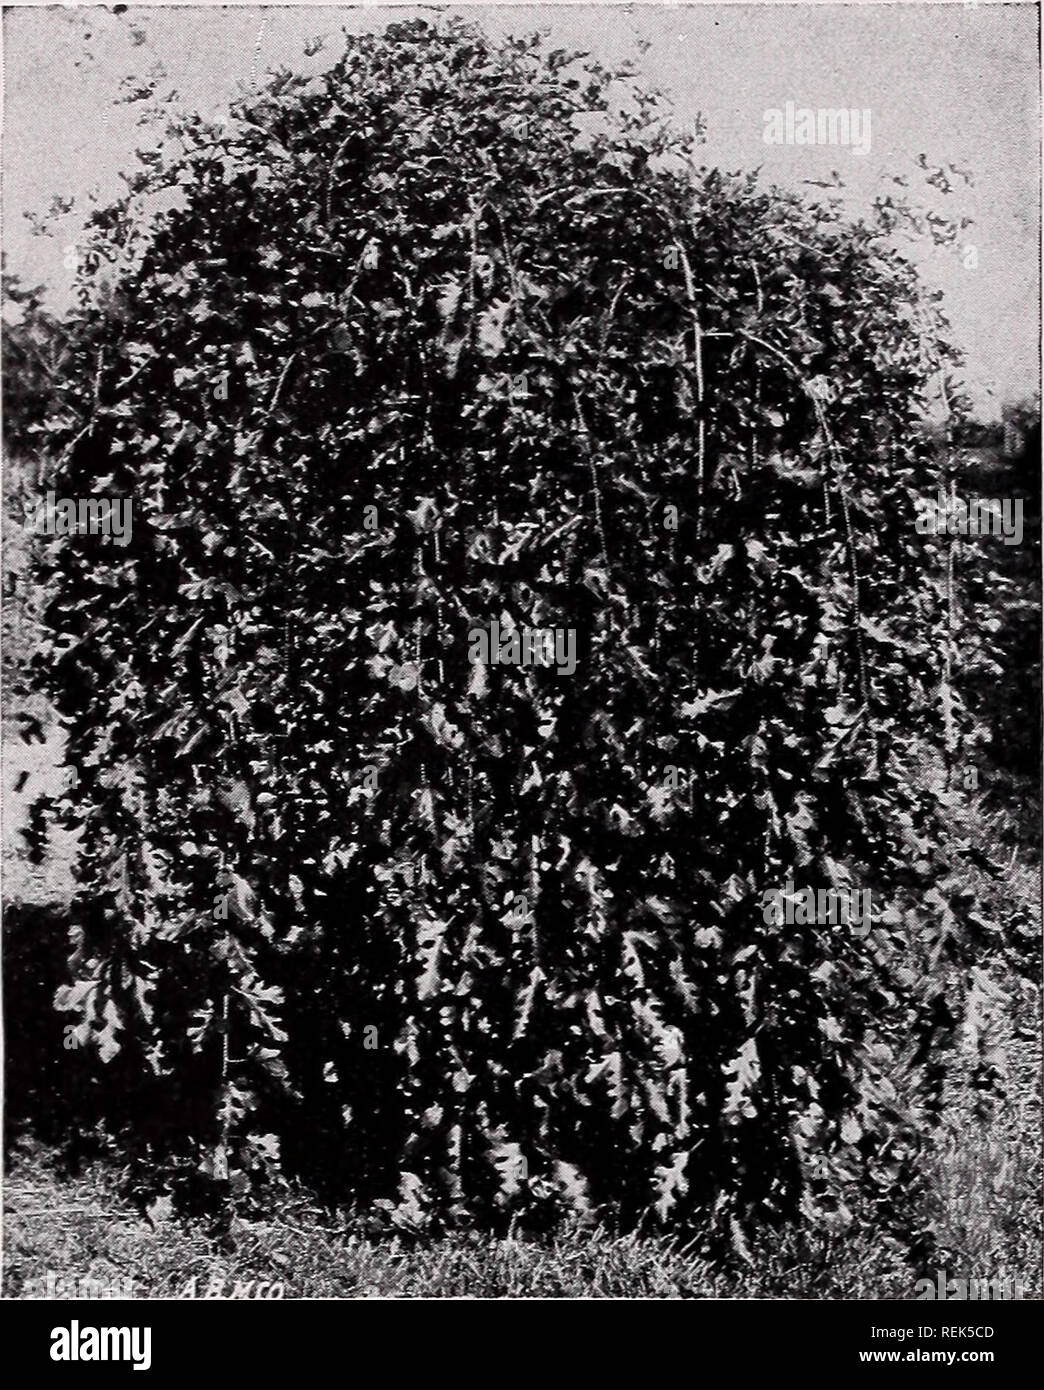 . C. M. Hobbs &amp; Sons. Nurseries Horticulture Catalogs; Evergreens Catalogs; Fruit trees Catalogs; Climbing plants Catalogs; Shrubs Catalogs; Vegetables Catalogs; Flowers Catalogs. 20 C. M. HOBBS &amp; SONS, BRIDGEPORT, INDIANA. Moras Alba Tatarica Pendula—Teas Weeping- Russian Mulberry. DECIDUOUS TREES—Continued. Larix - The Larch Larix europea. A quick growing, conical-shaped tree. Leaf buds appear in spring like tiny pink and green blossoms, followed by the soft light green foliage. Plant in well- drained soils. Liquidambar - Sweet Gum Liquidambar styraciflua. Always a shapely tree of mu Stock Photo